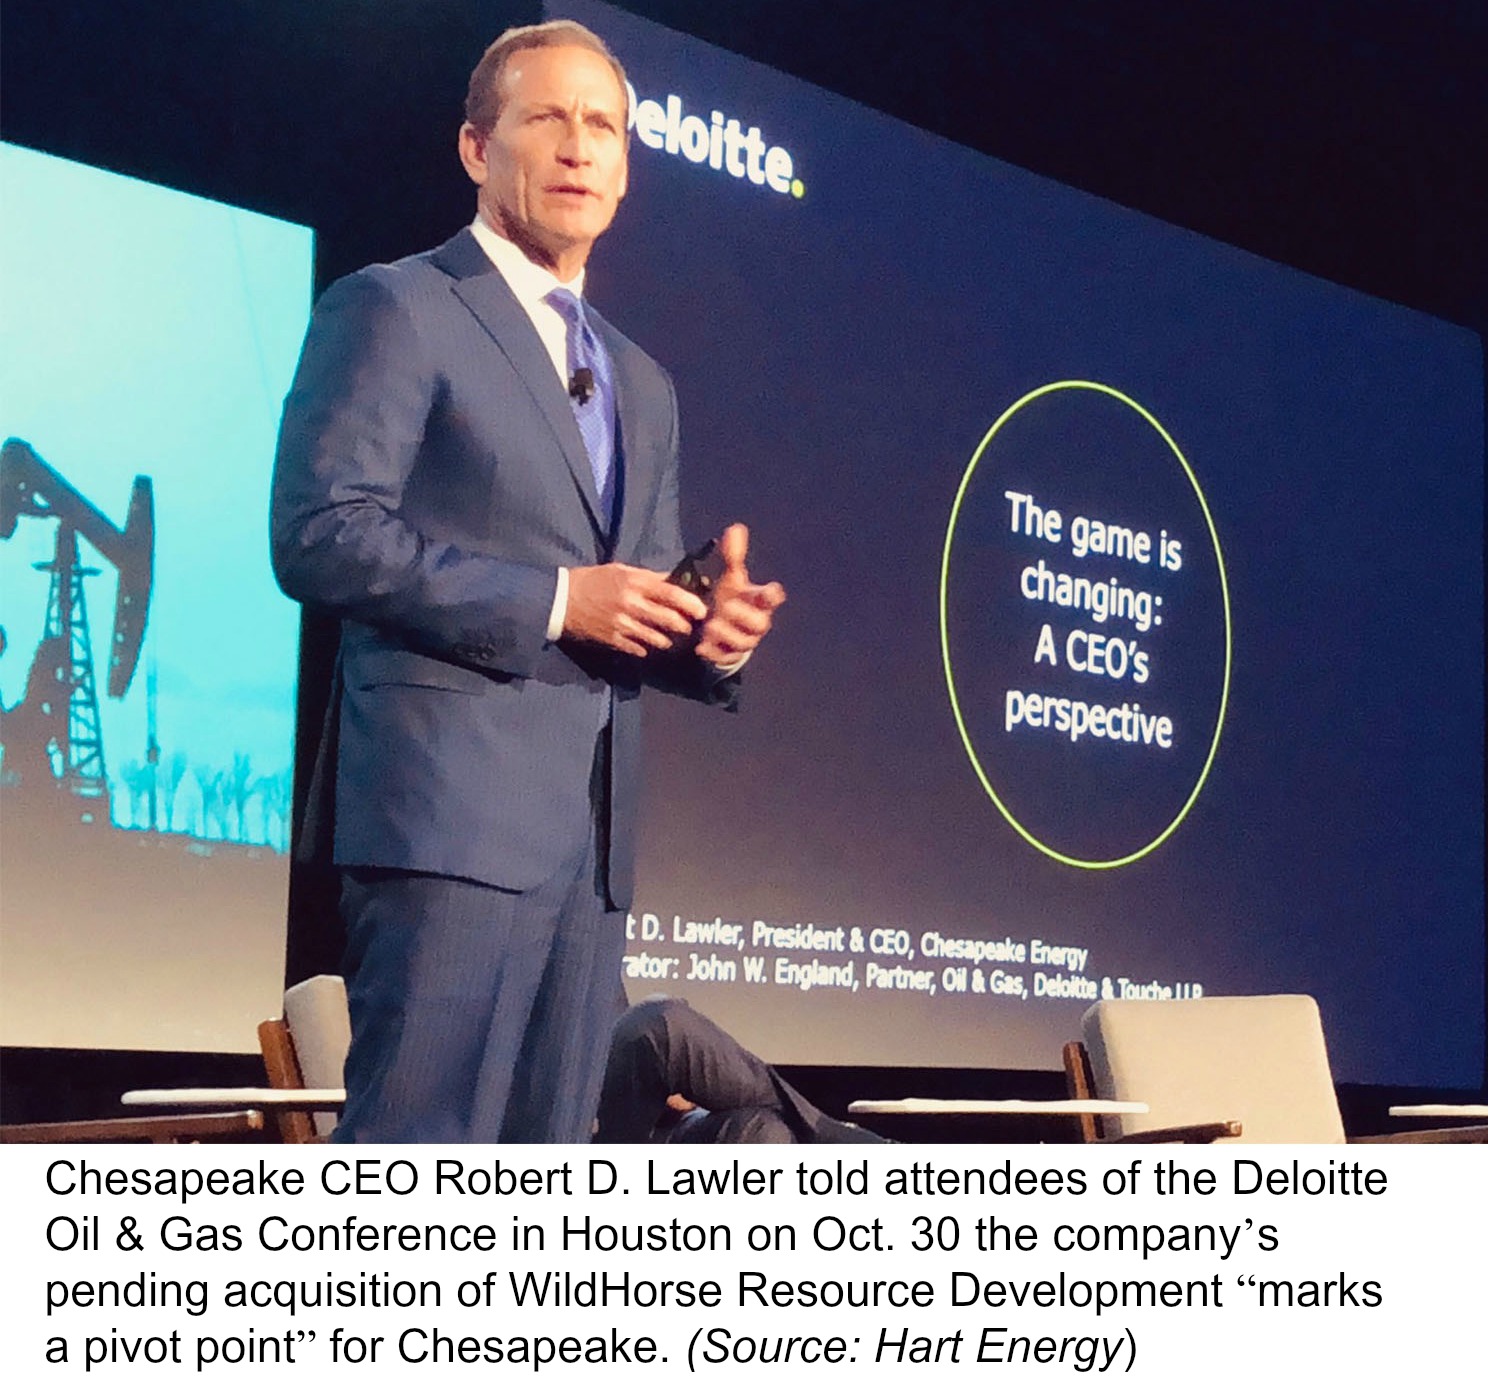 Chesapeake CEO Robert D. Lawler told attendees of the Deloitte Oil & Gas Conference in Houston on Oct. 30 the company’s pending acquisition of WildHorse Resource Development “marks a pivot point” for Chesapeake. (Source: Hart Energy)